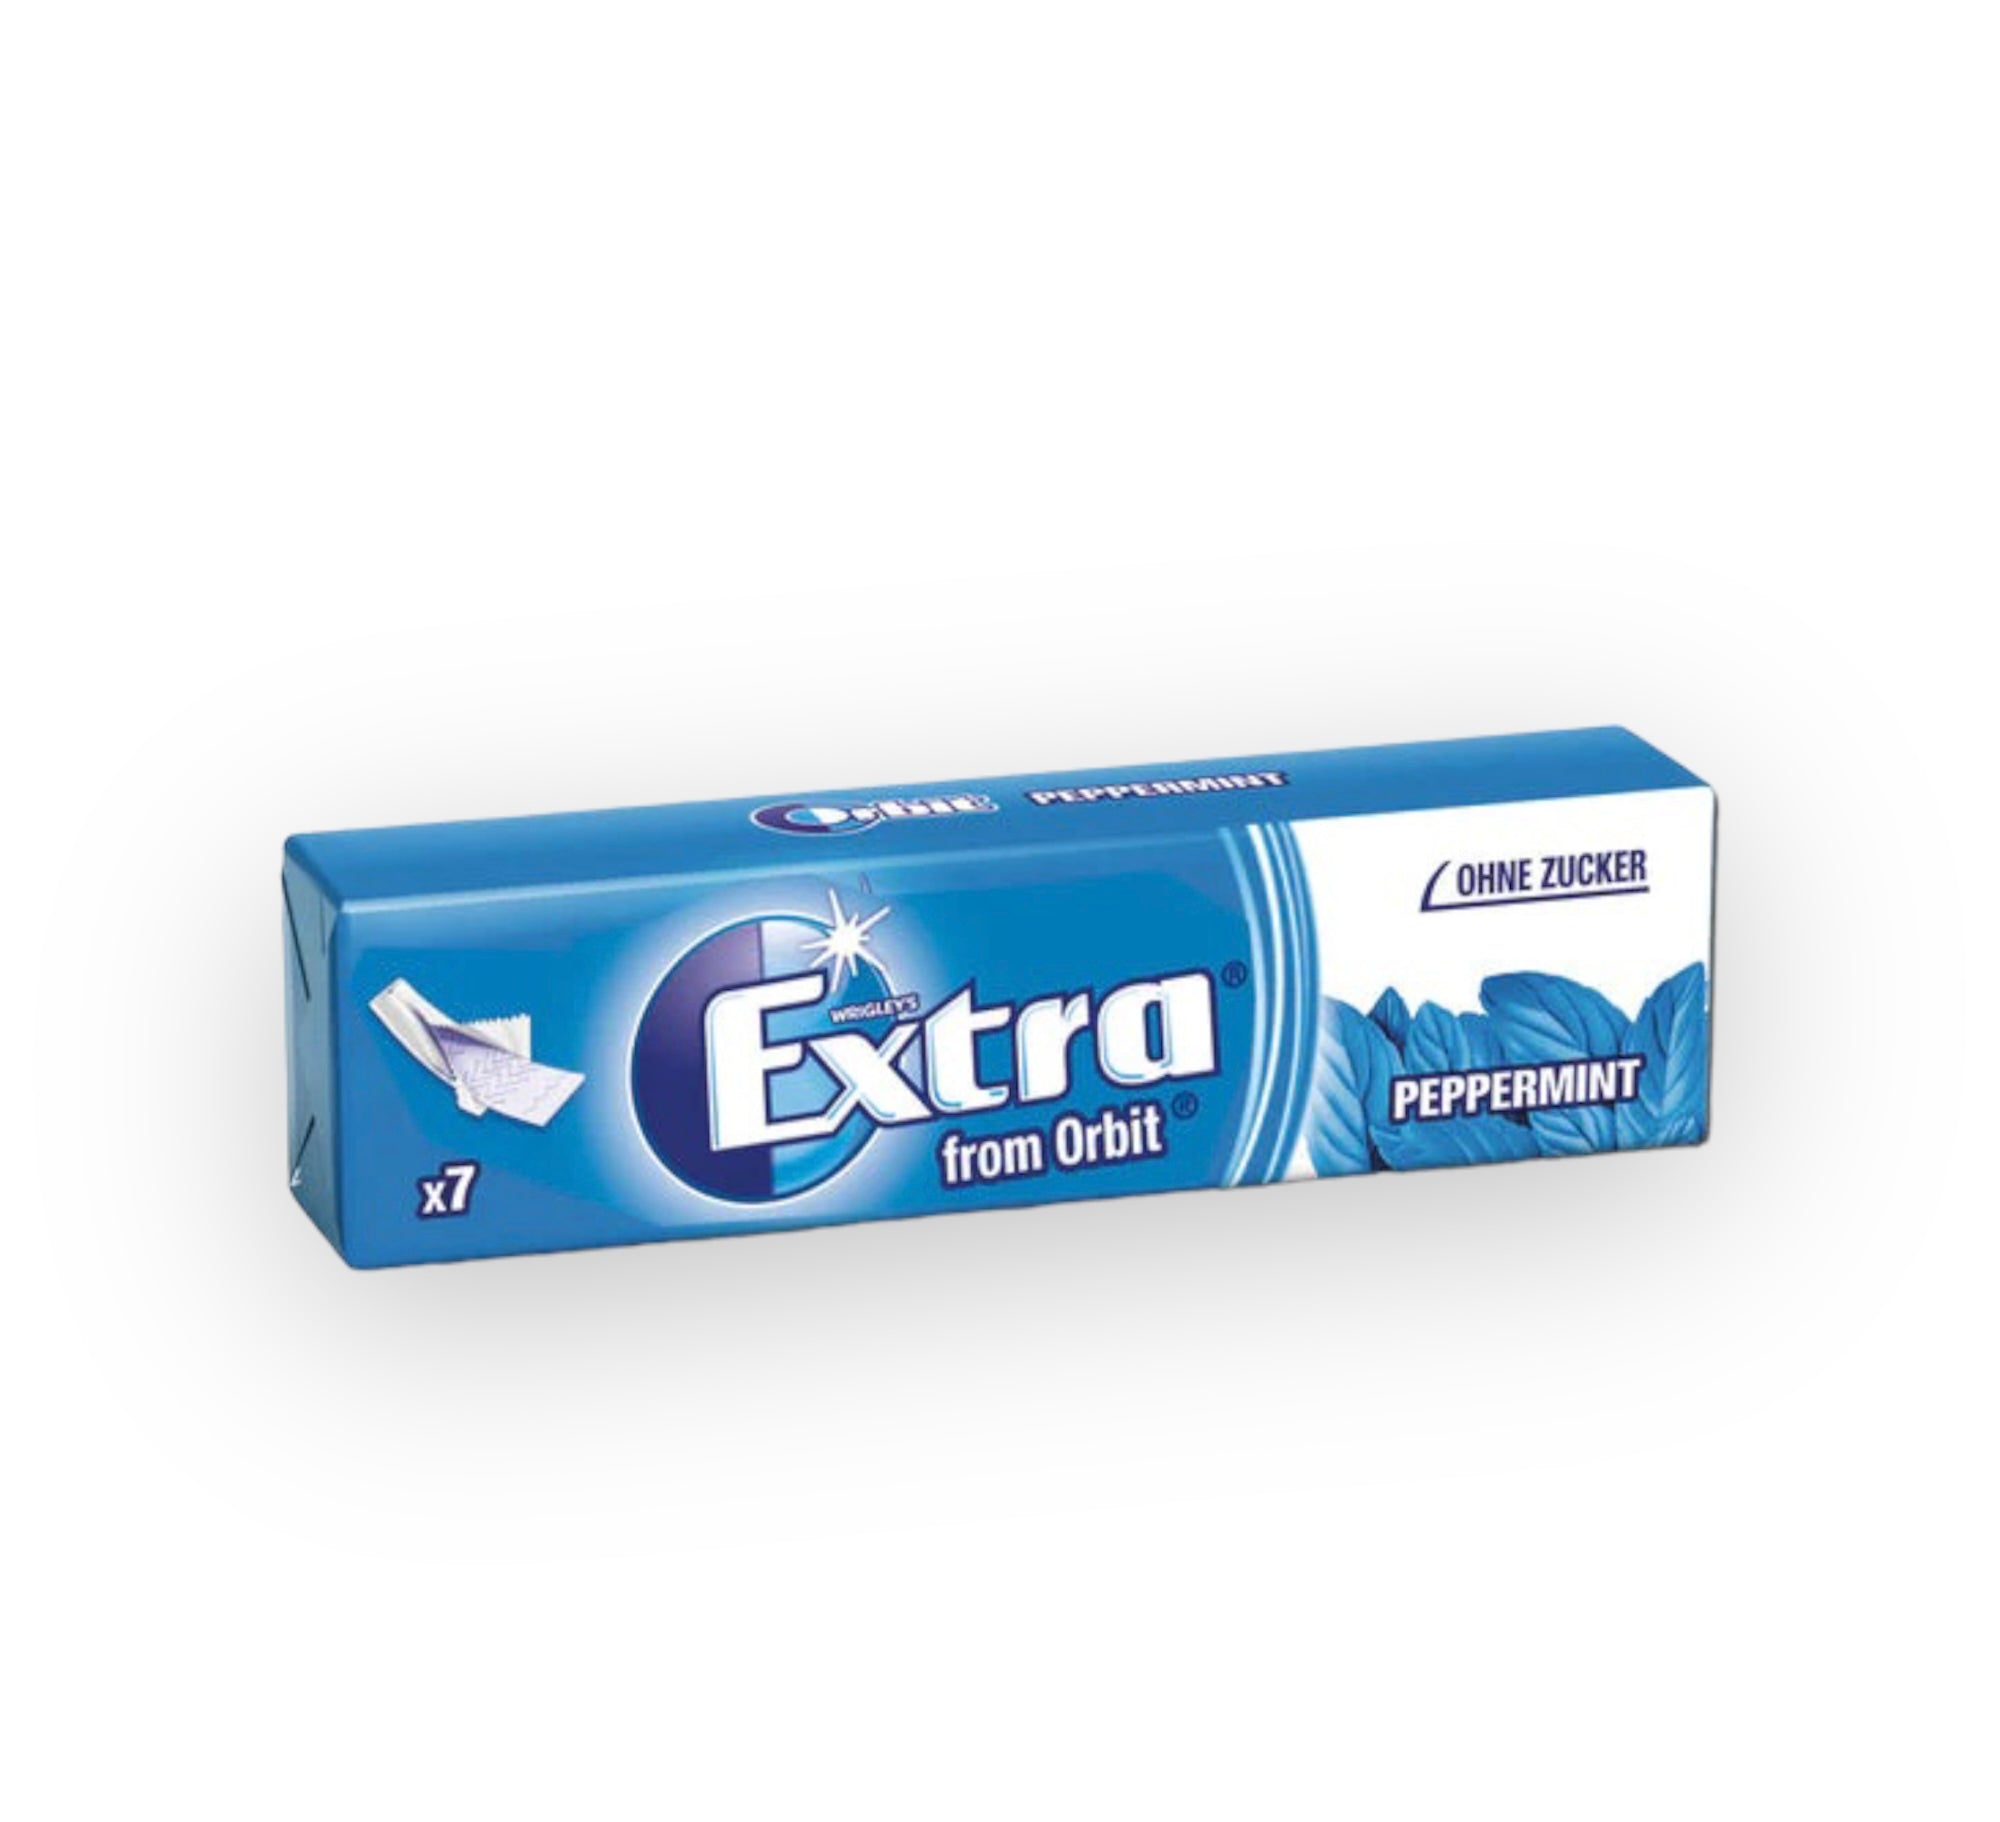 Wrigley's Extra Peppermint, chewing gum, 7 strips